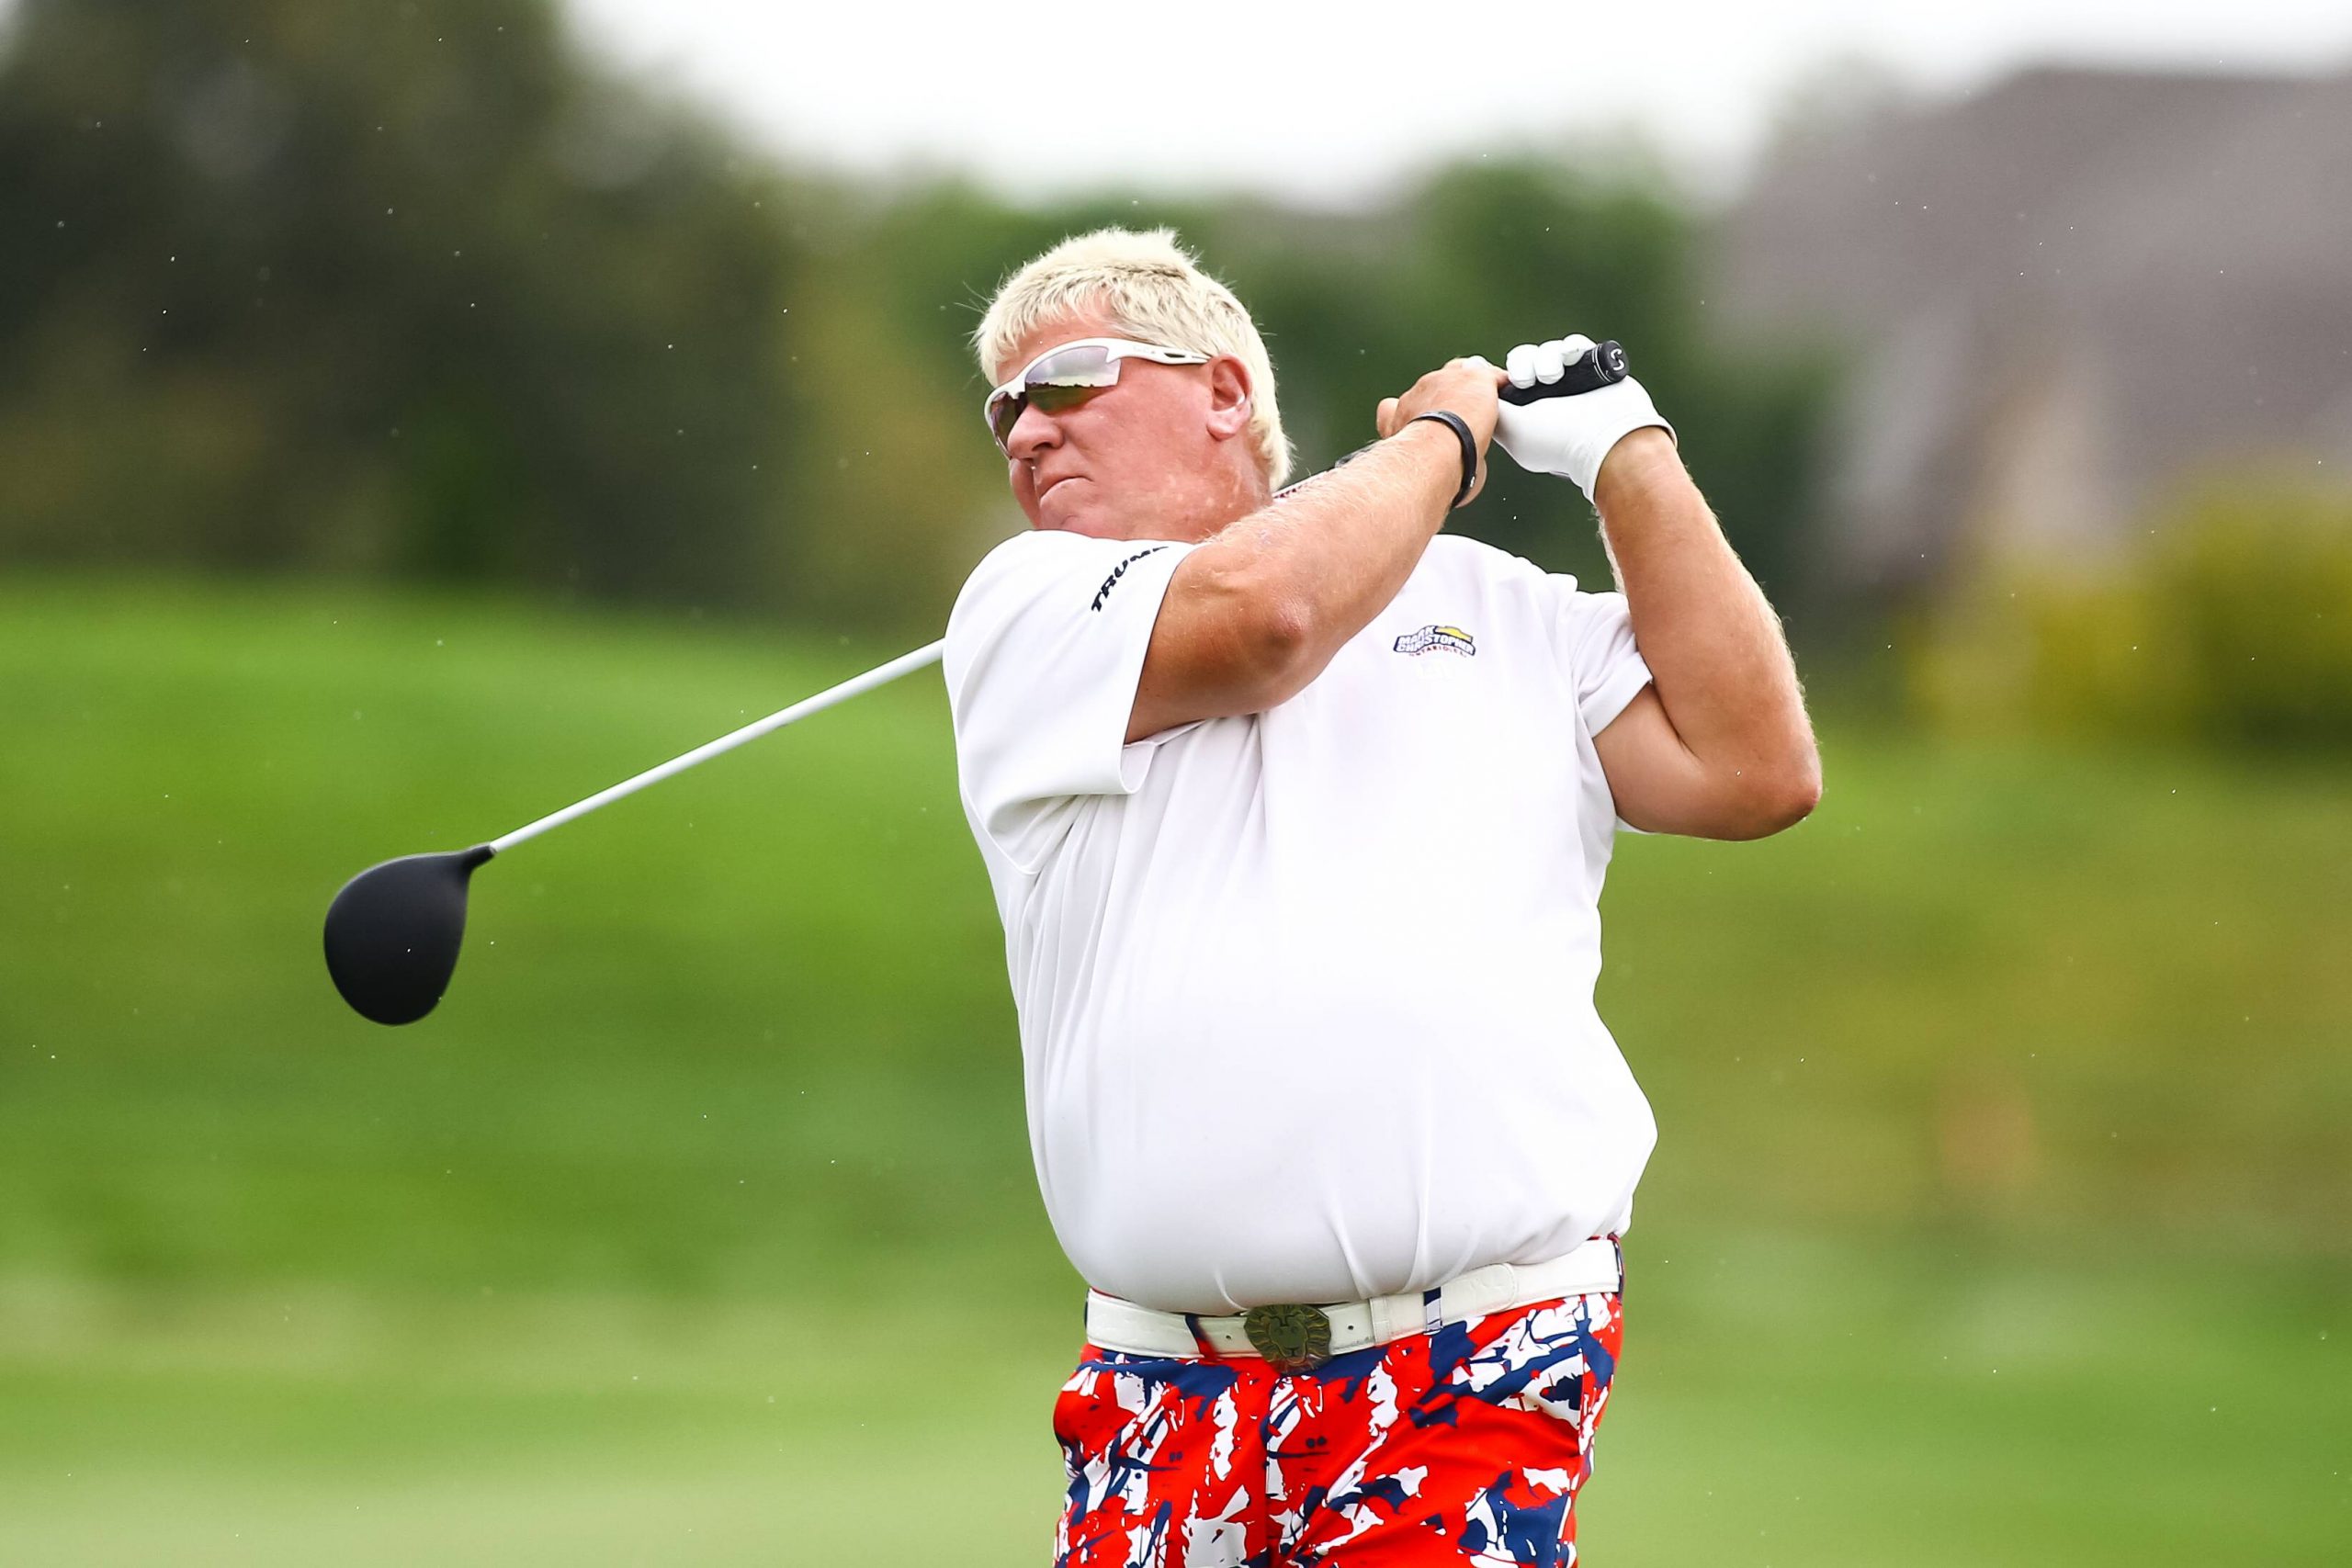 John Daly 2021 - Net Worth, Salary, Records, and Endorsements